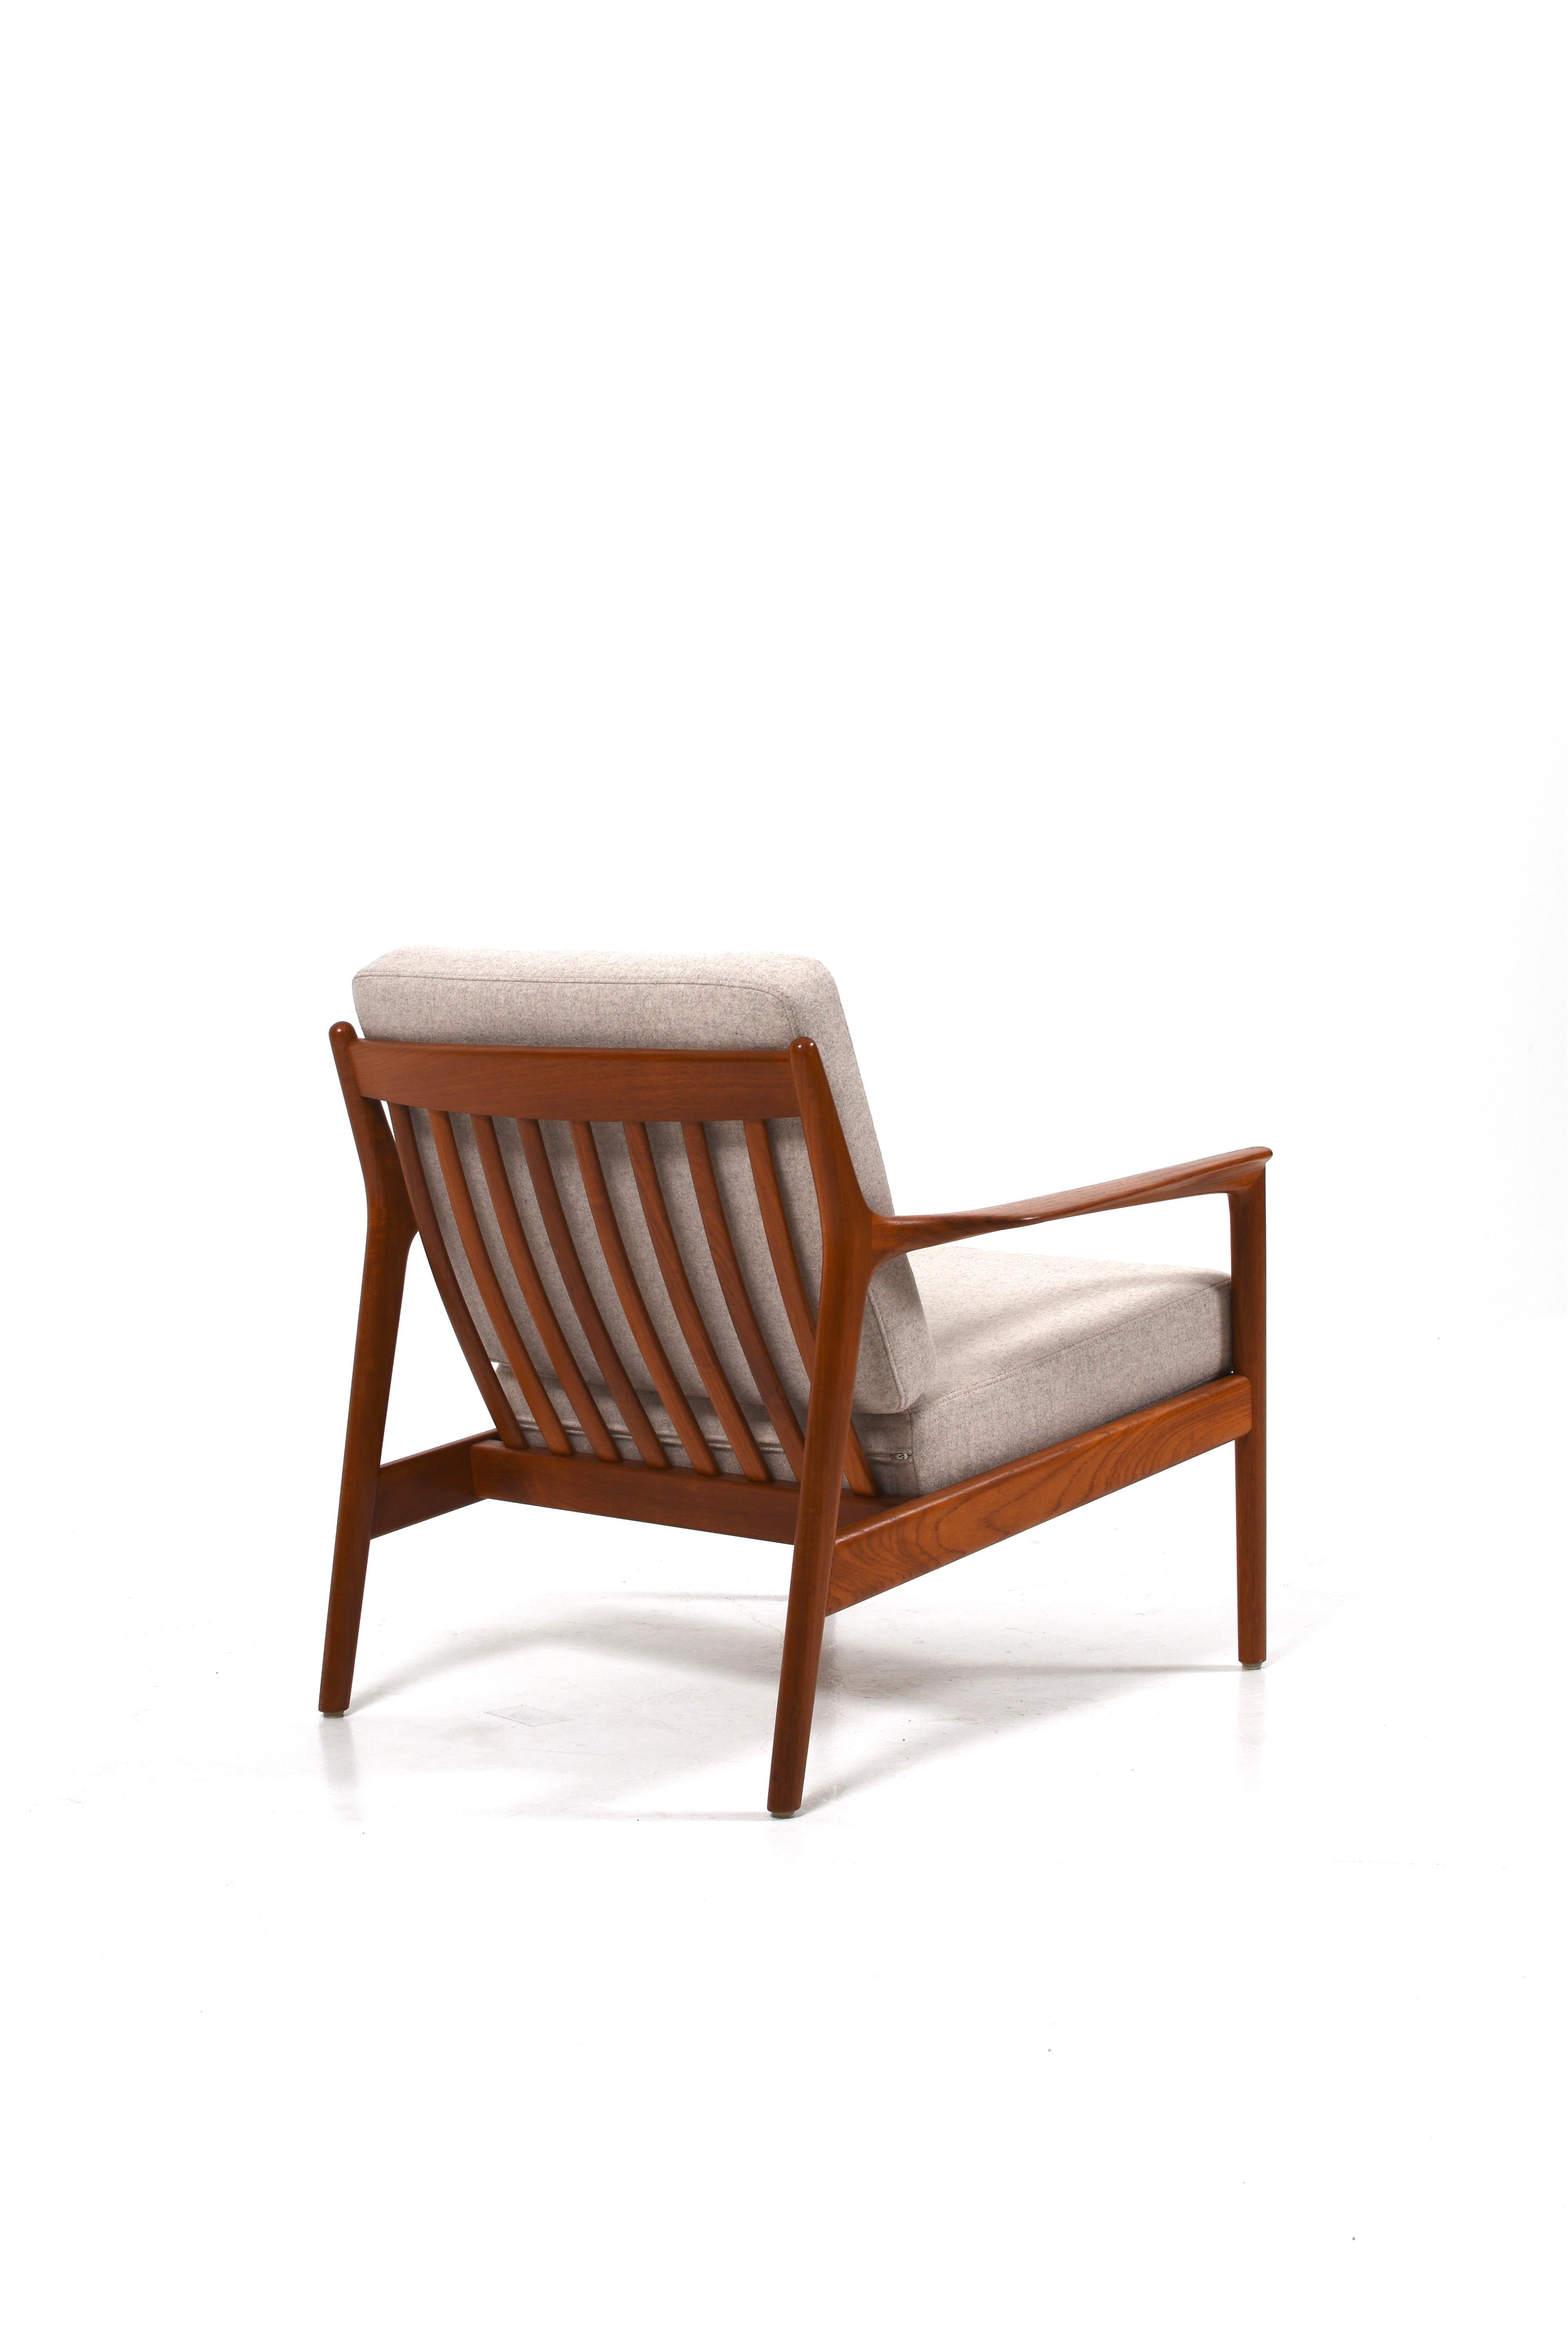 Pair of “USA 75” Teak Lounge Chairs by Folke Ohlsson for DUX, Sweden, 1960s For Sale 3